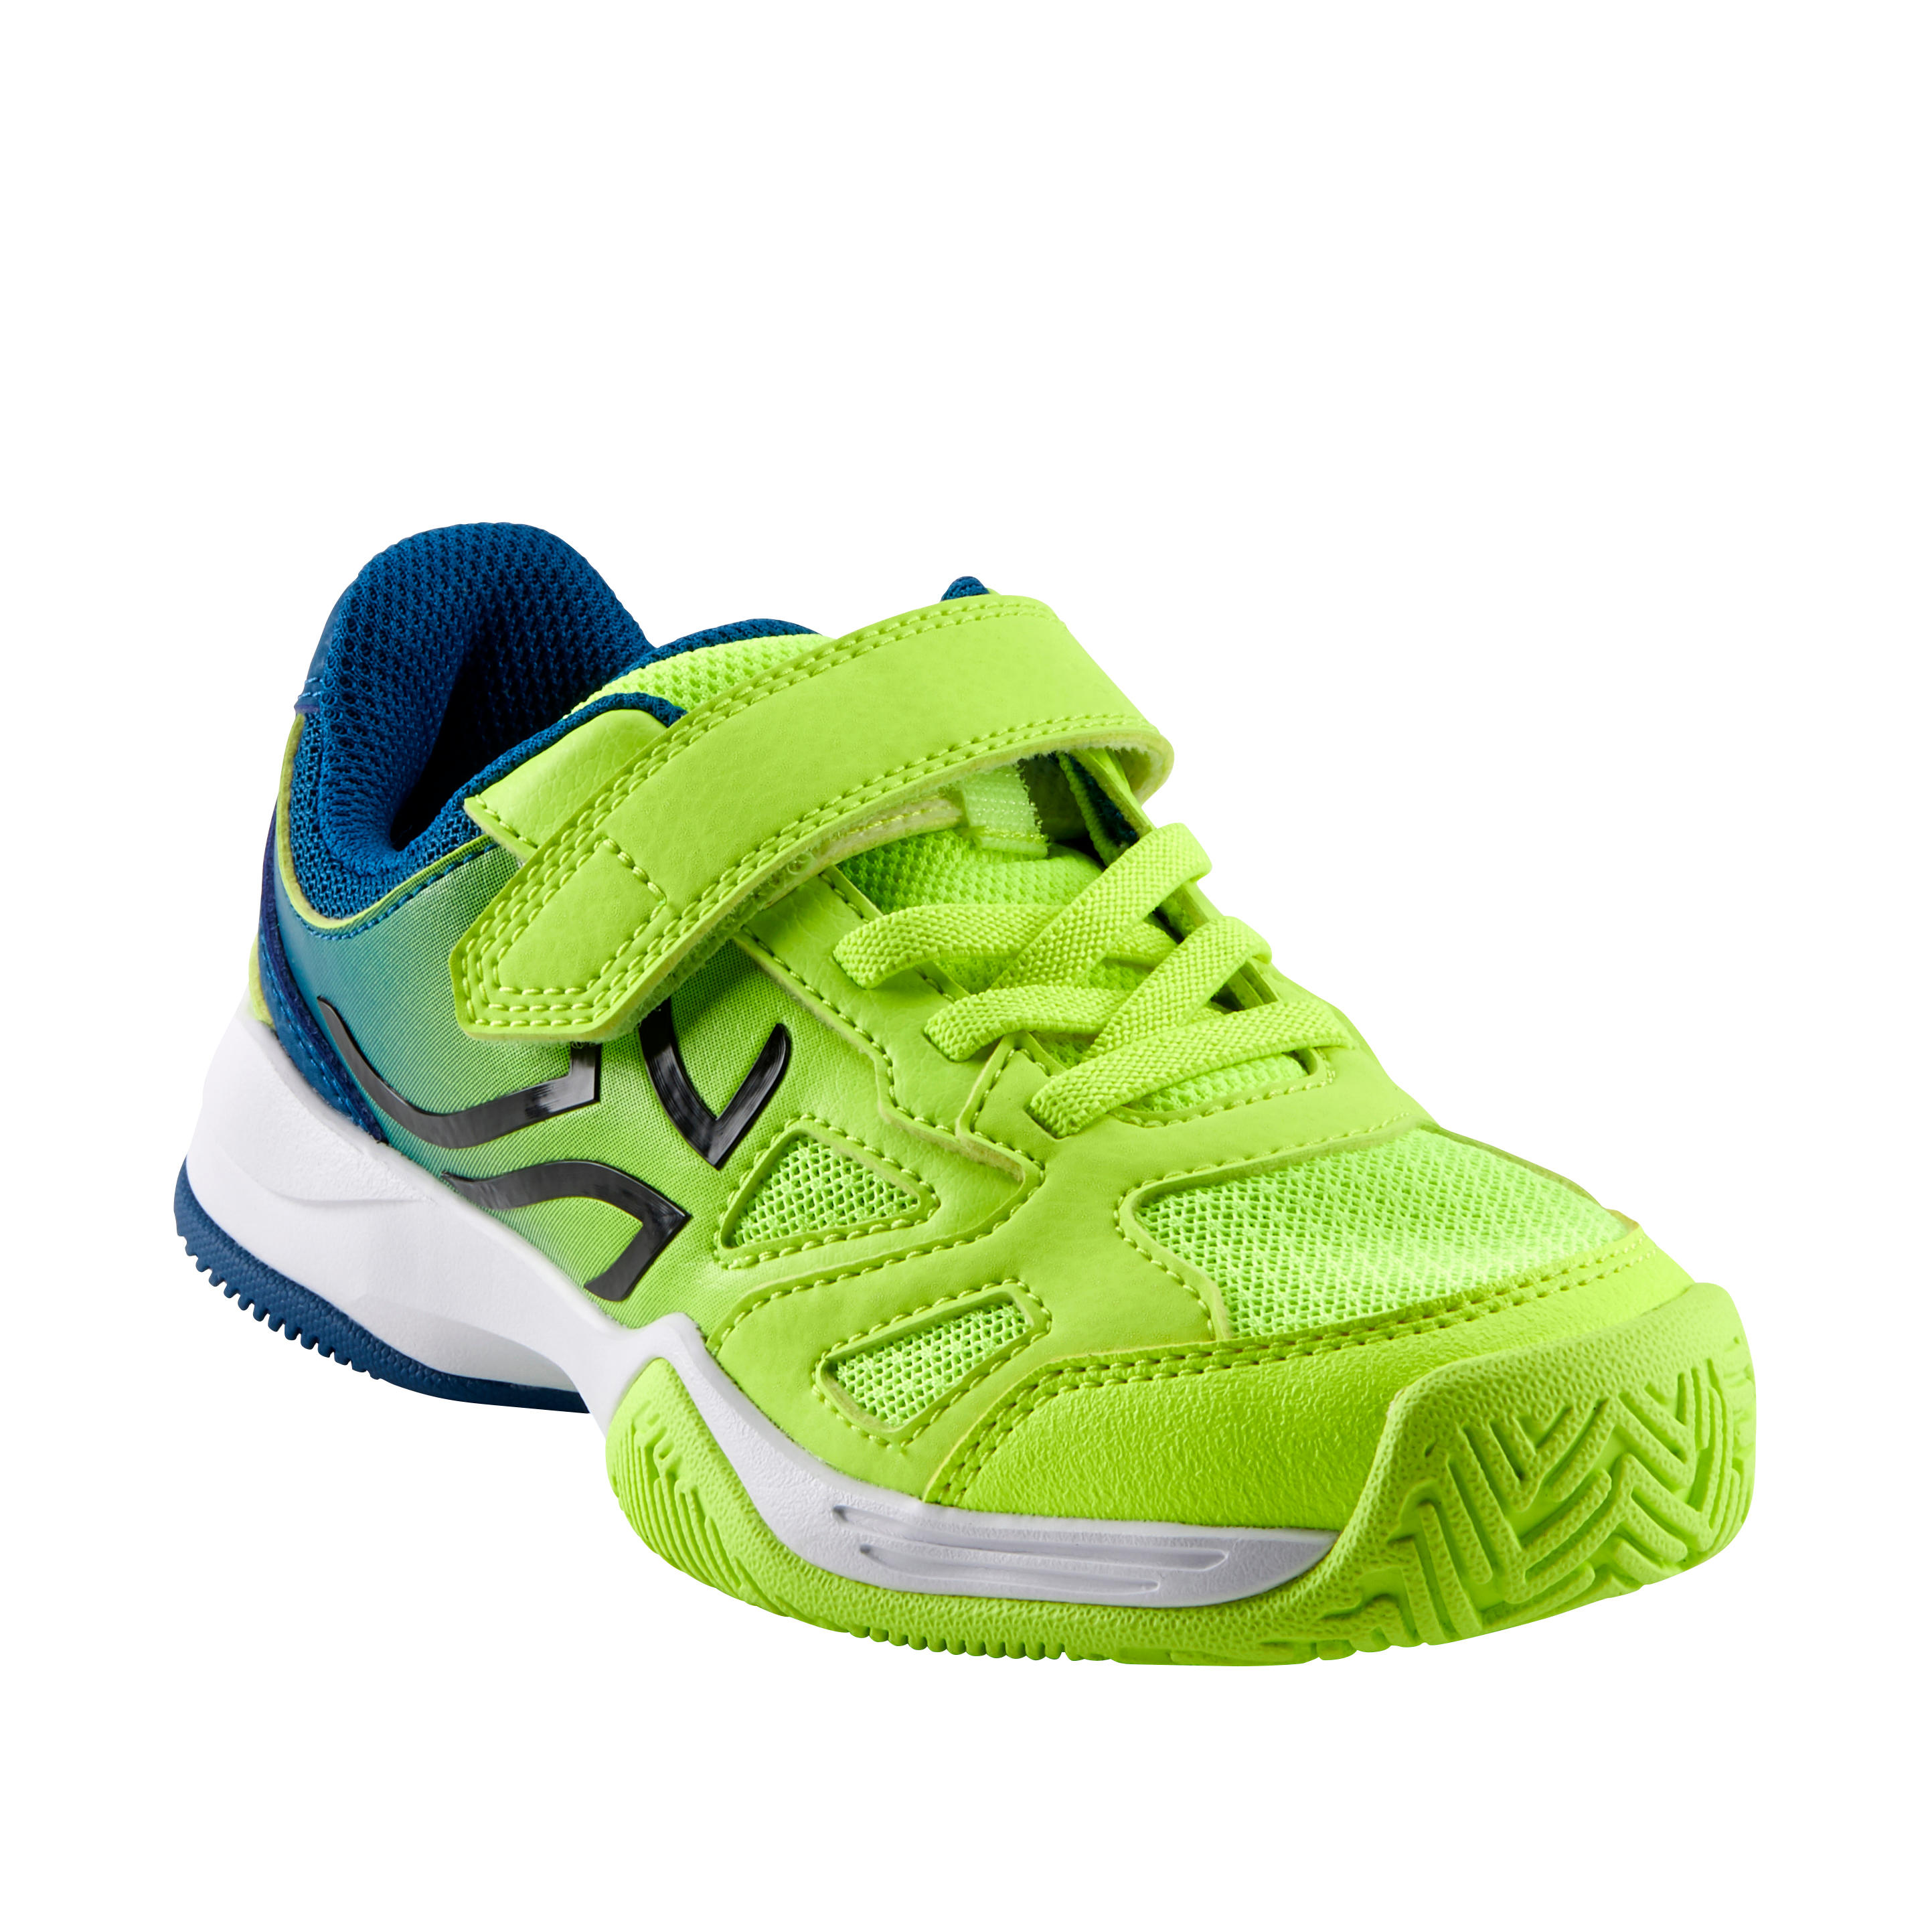 kd tennis shoes for kids